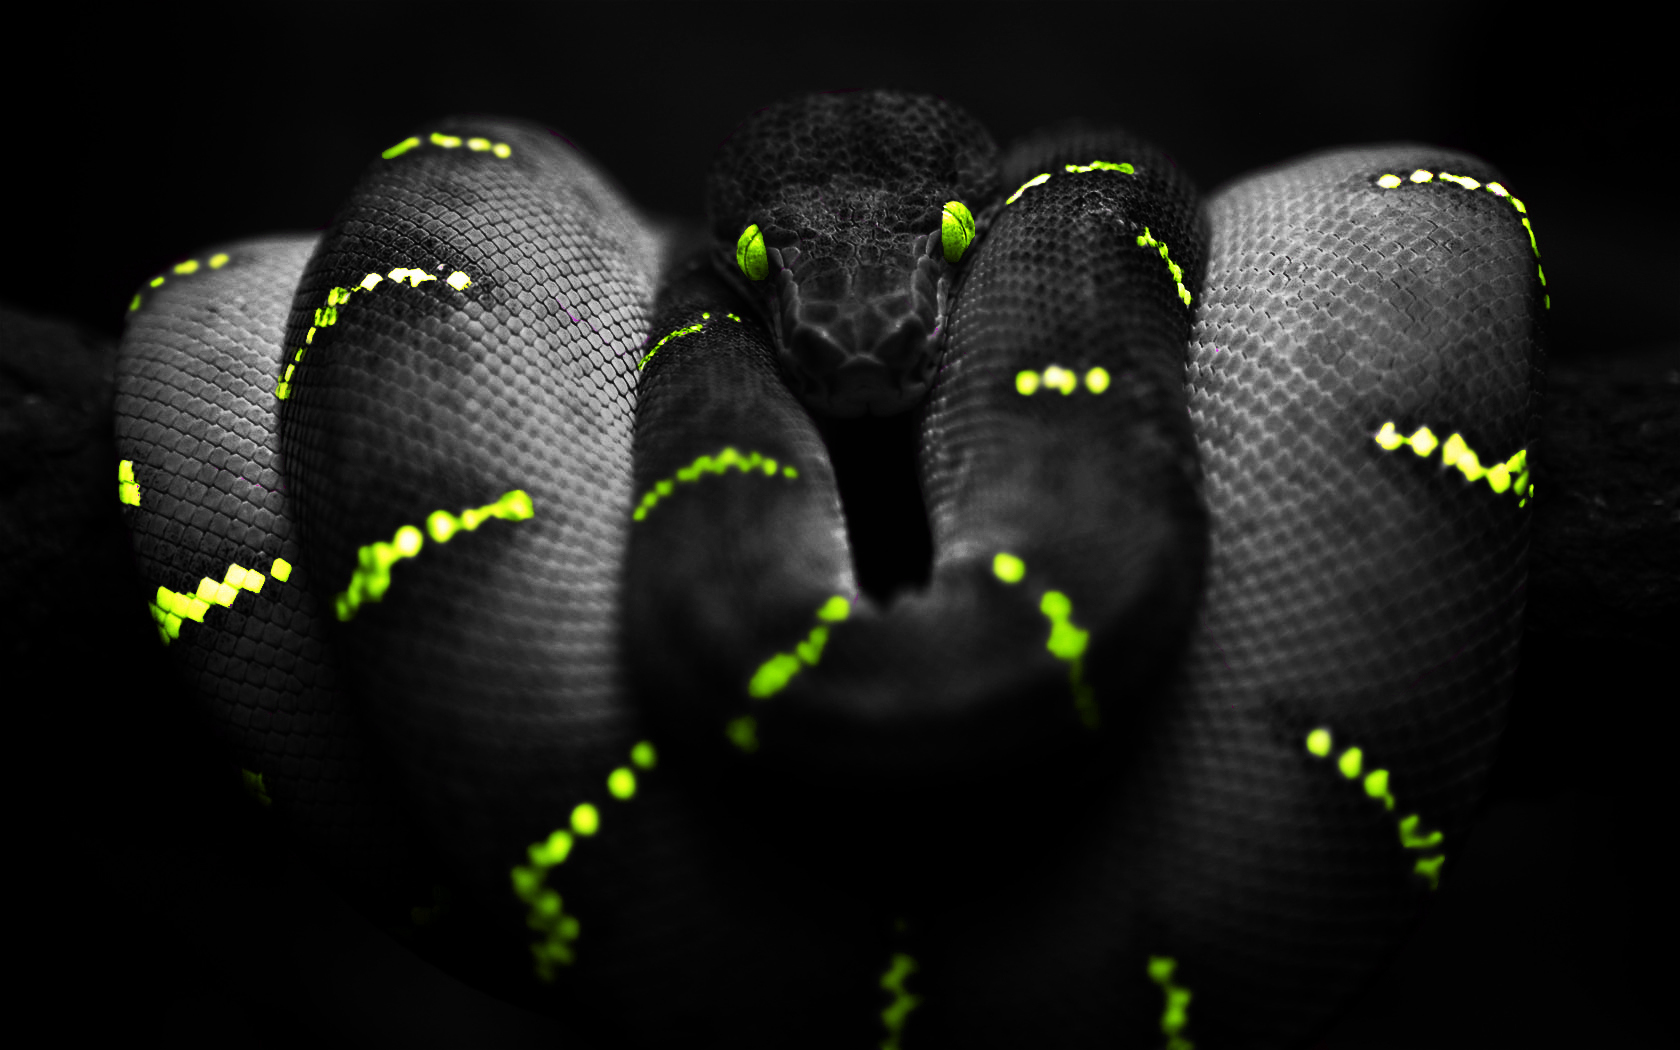  download 275 Snake HD Wallpapers Backgrounds [1680x1050] for 1680x1050